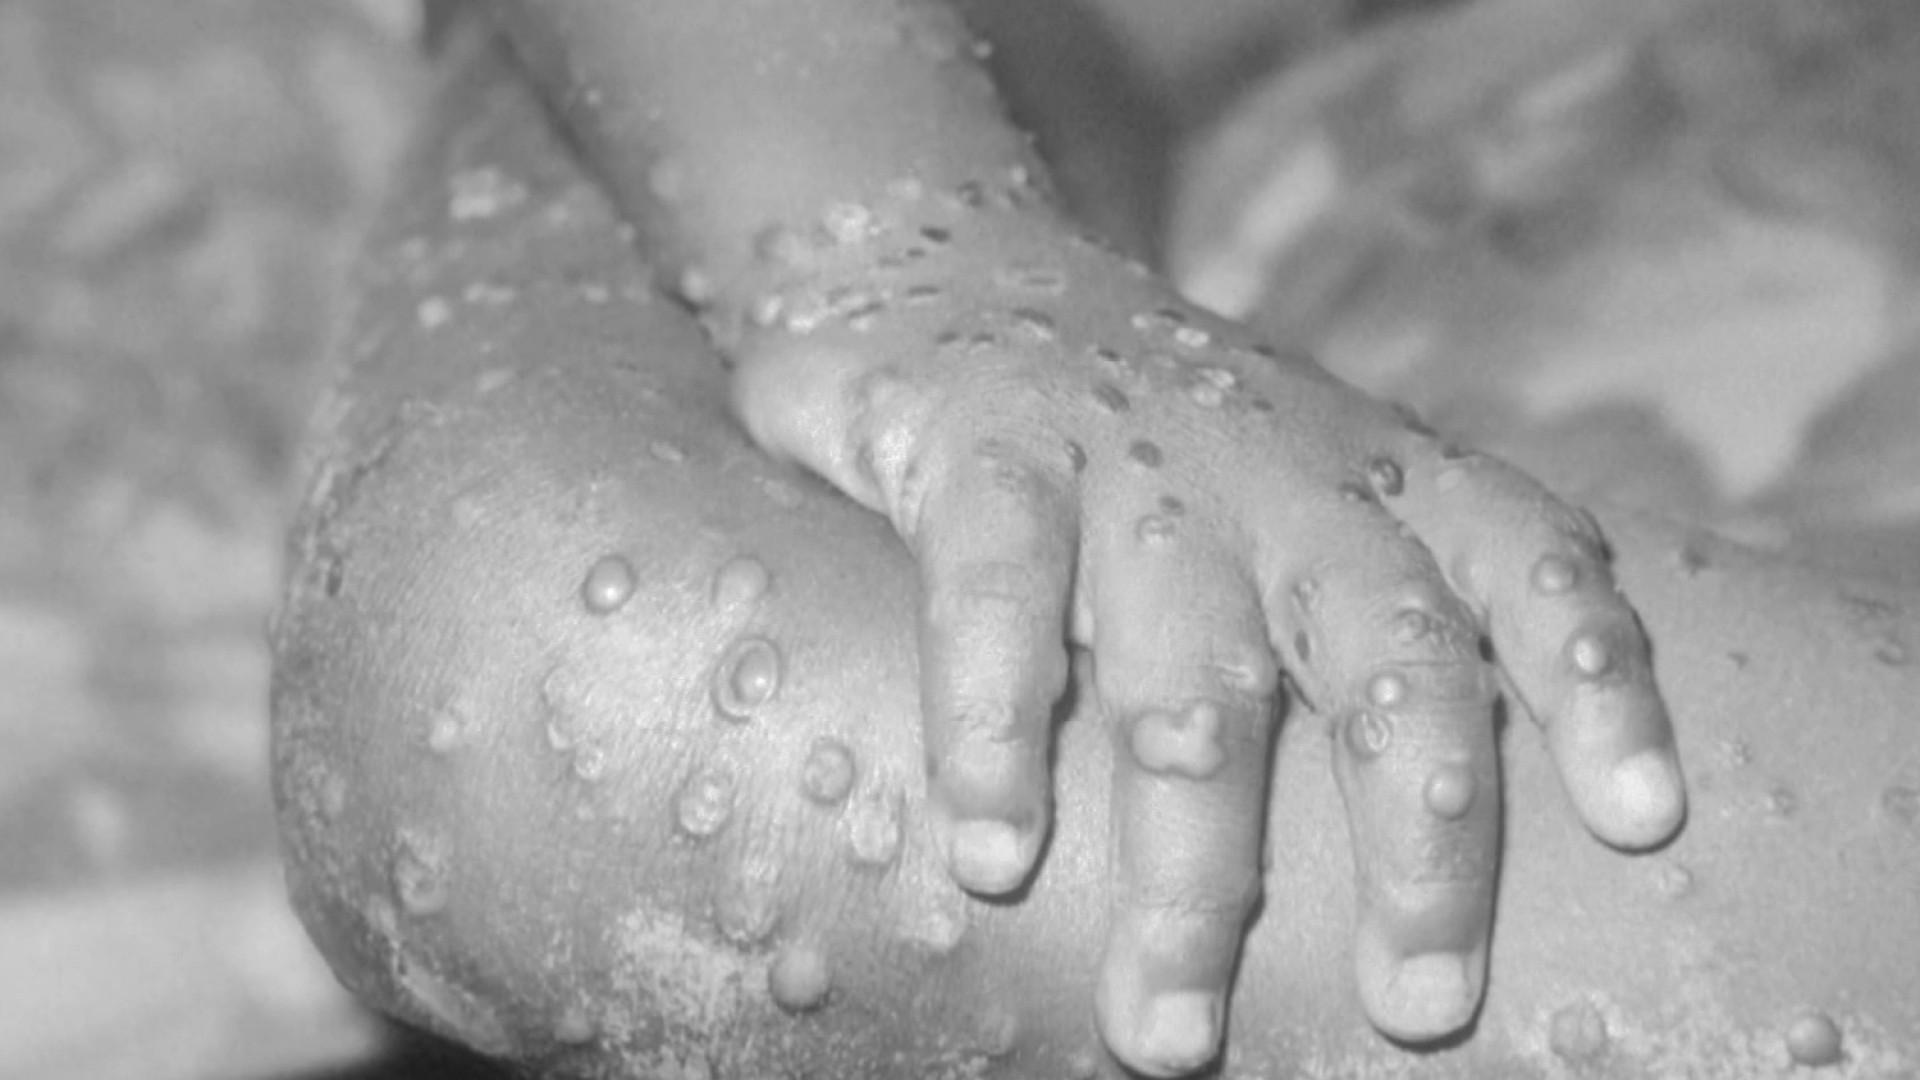 Monkeypox: What are the causes and symptoms of infection?